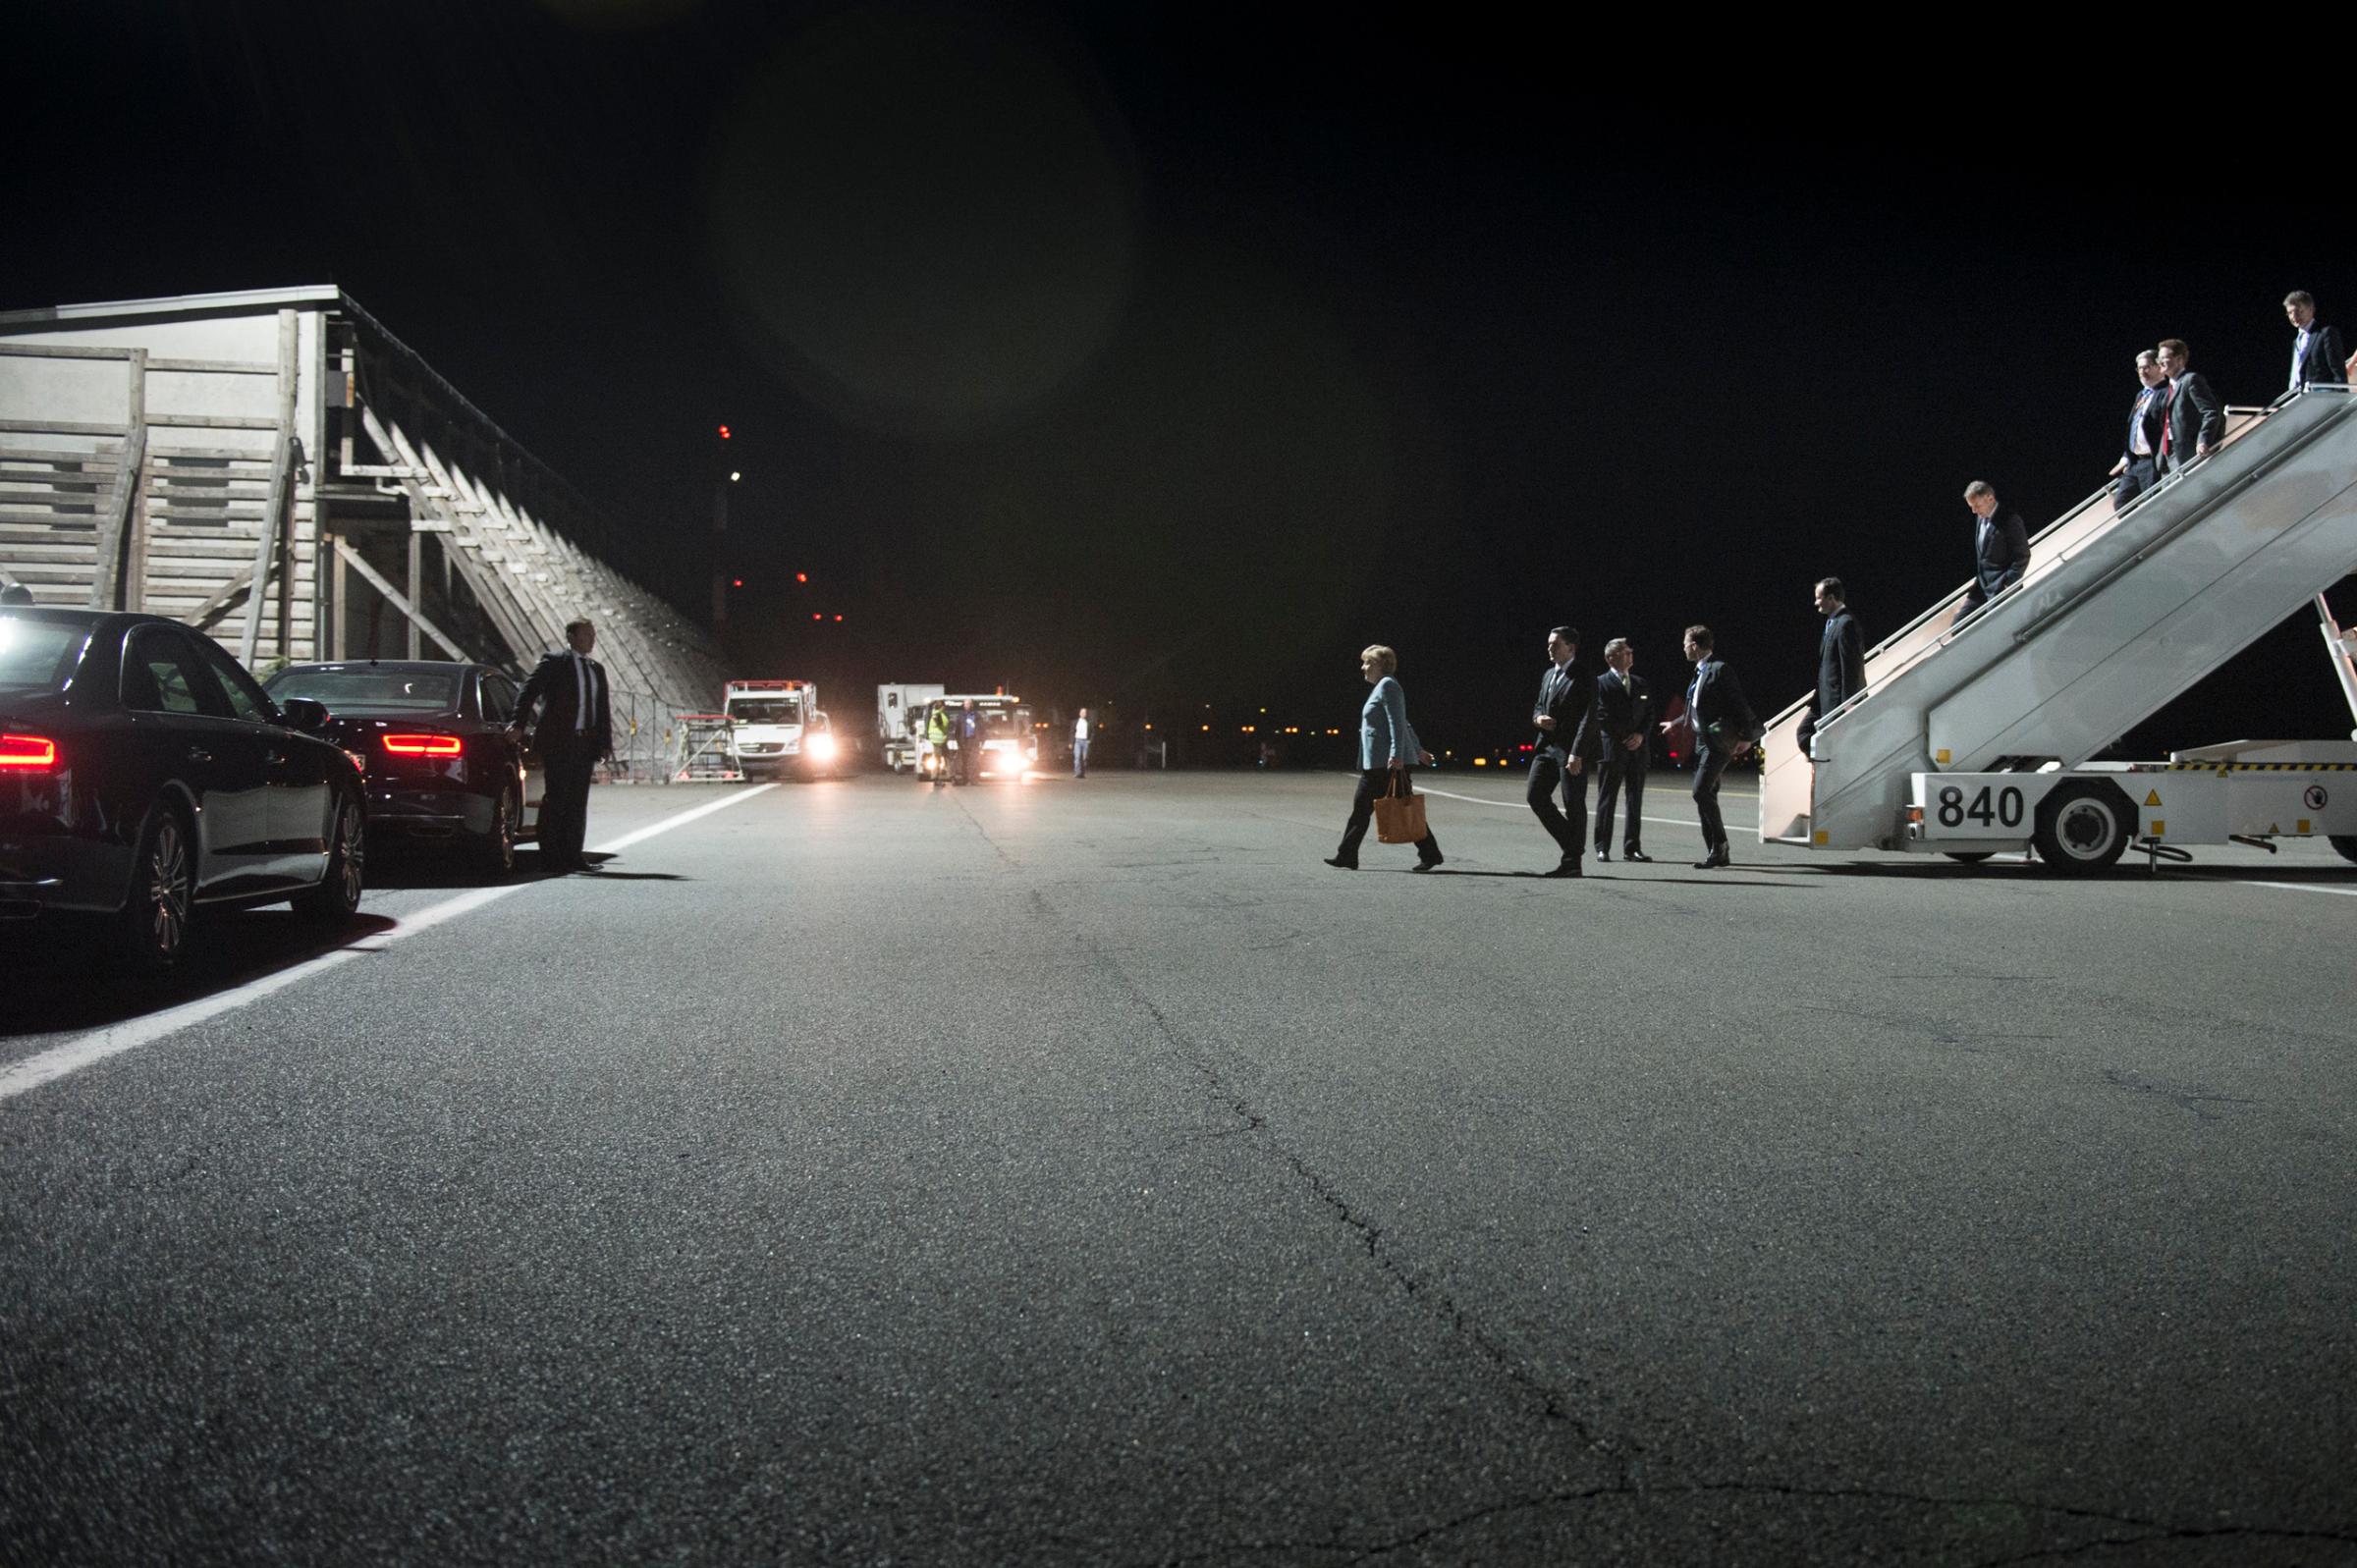 ChaChancellor Merkel returns to Berlin airport at 3 AM after a meeting at the European Council in Brussels. May 24, 2012.ncellor Merkel returns to Berlin airport at 3 A.M. after a meeting at the European Council in Brussels